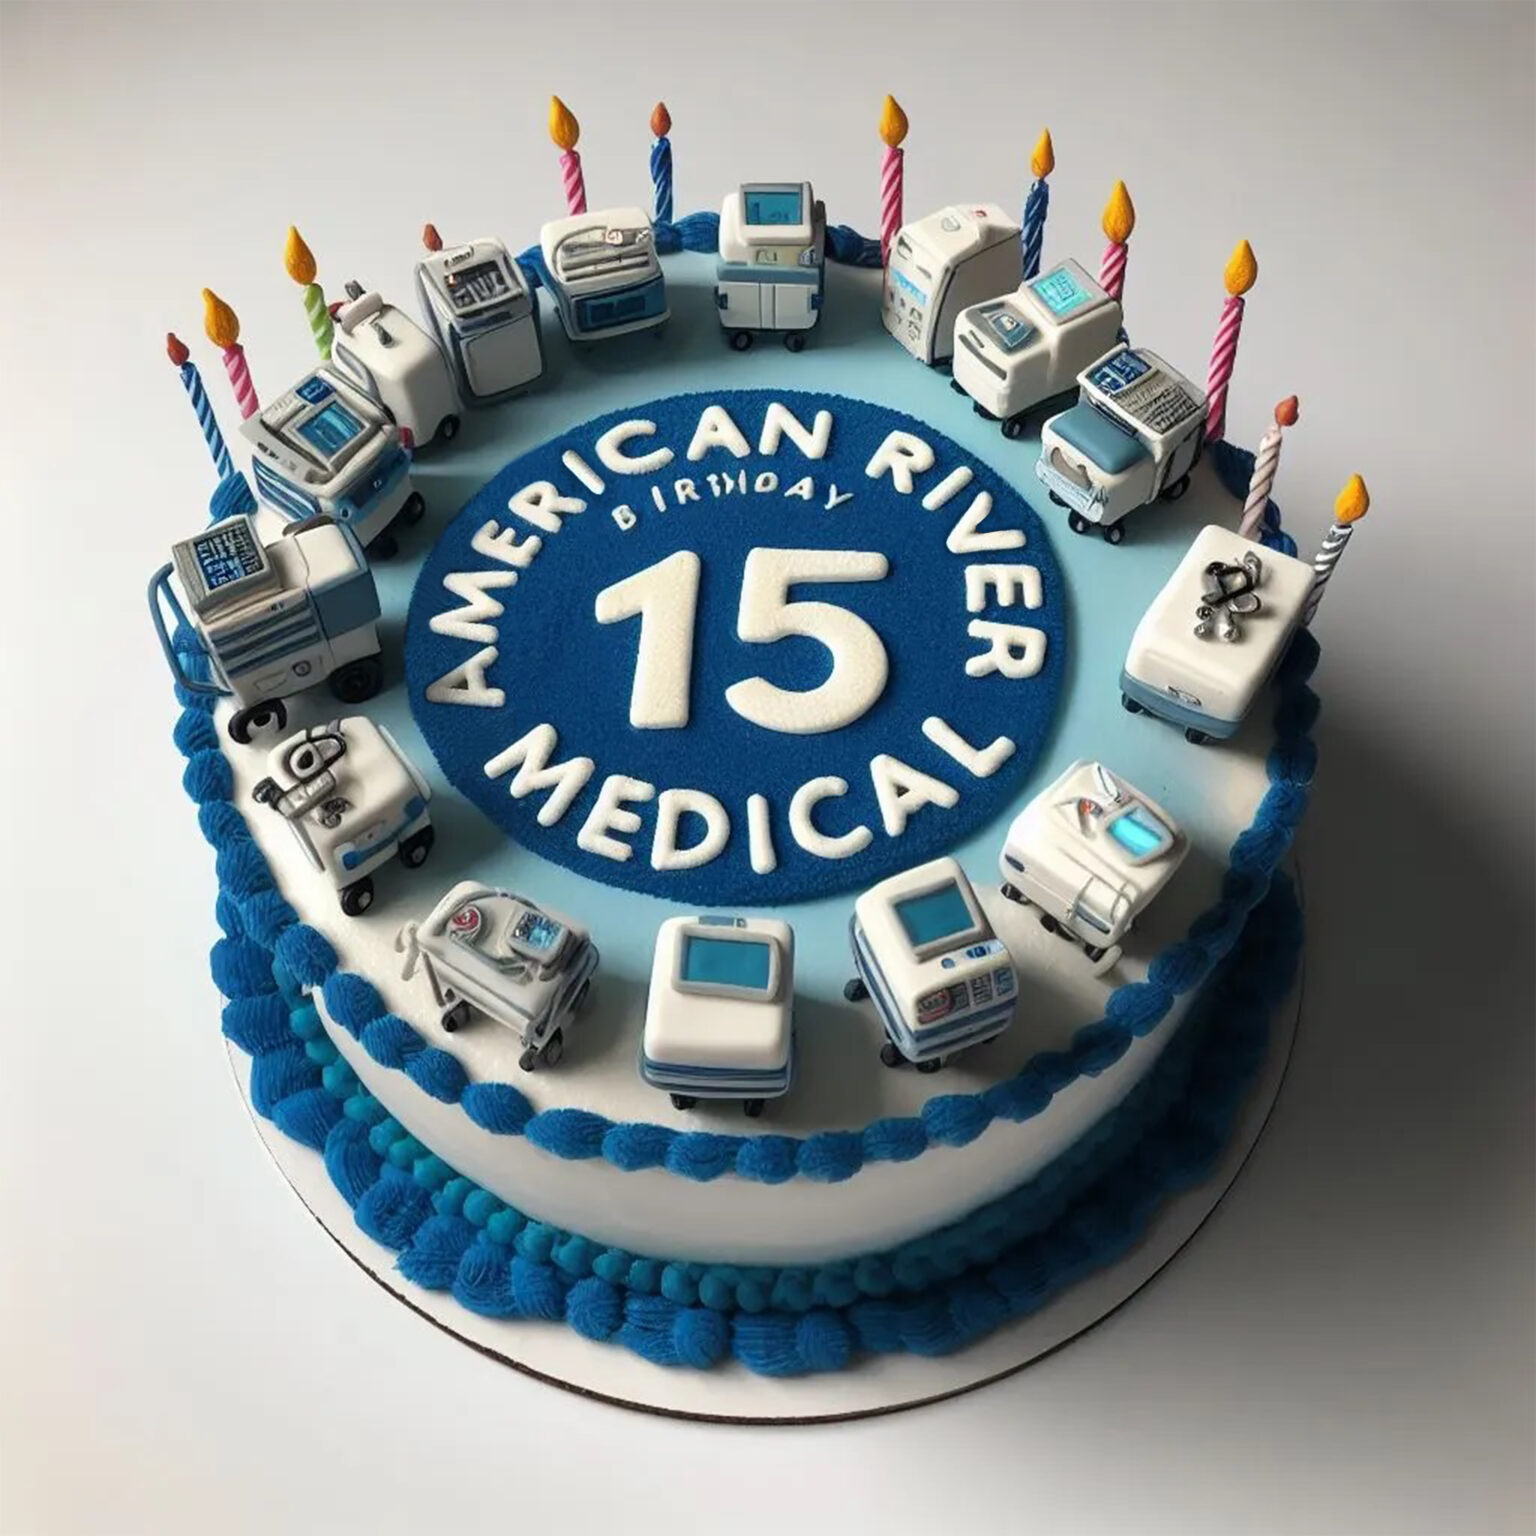 Celebrating 15 Years of Medical Carts and Storage for Nursing - American River Medical